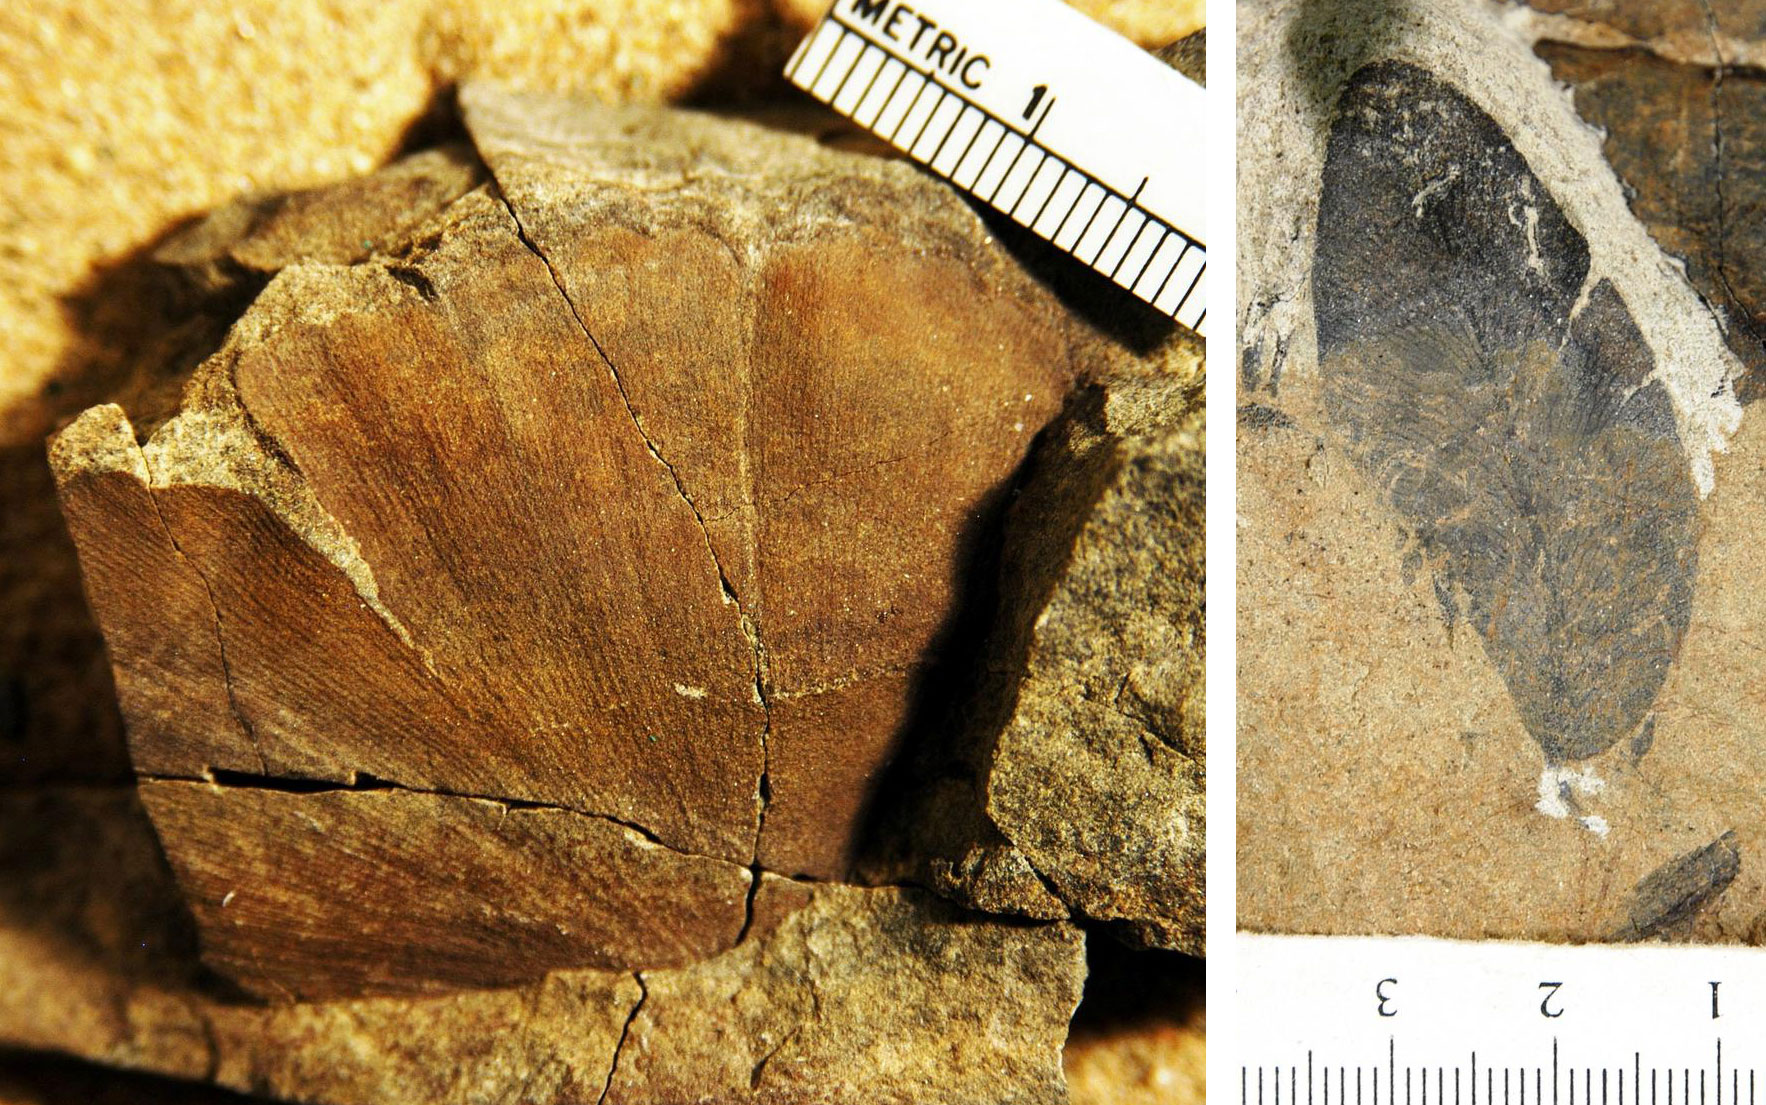 Photograph of a fossil leaves from the Early Cretaceous of Washington. Panel 1: Ginkgo leaf. The leaf is fan-shaped and has dense dichotomizing (forking) veins. Panel 2: Portion of a seed fern leaflet. The leaflet is ovate and has a midvein (central vein) with dichotomizing (forking) veins to either side.